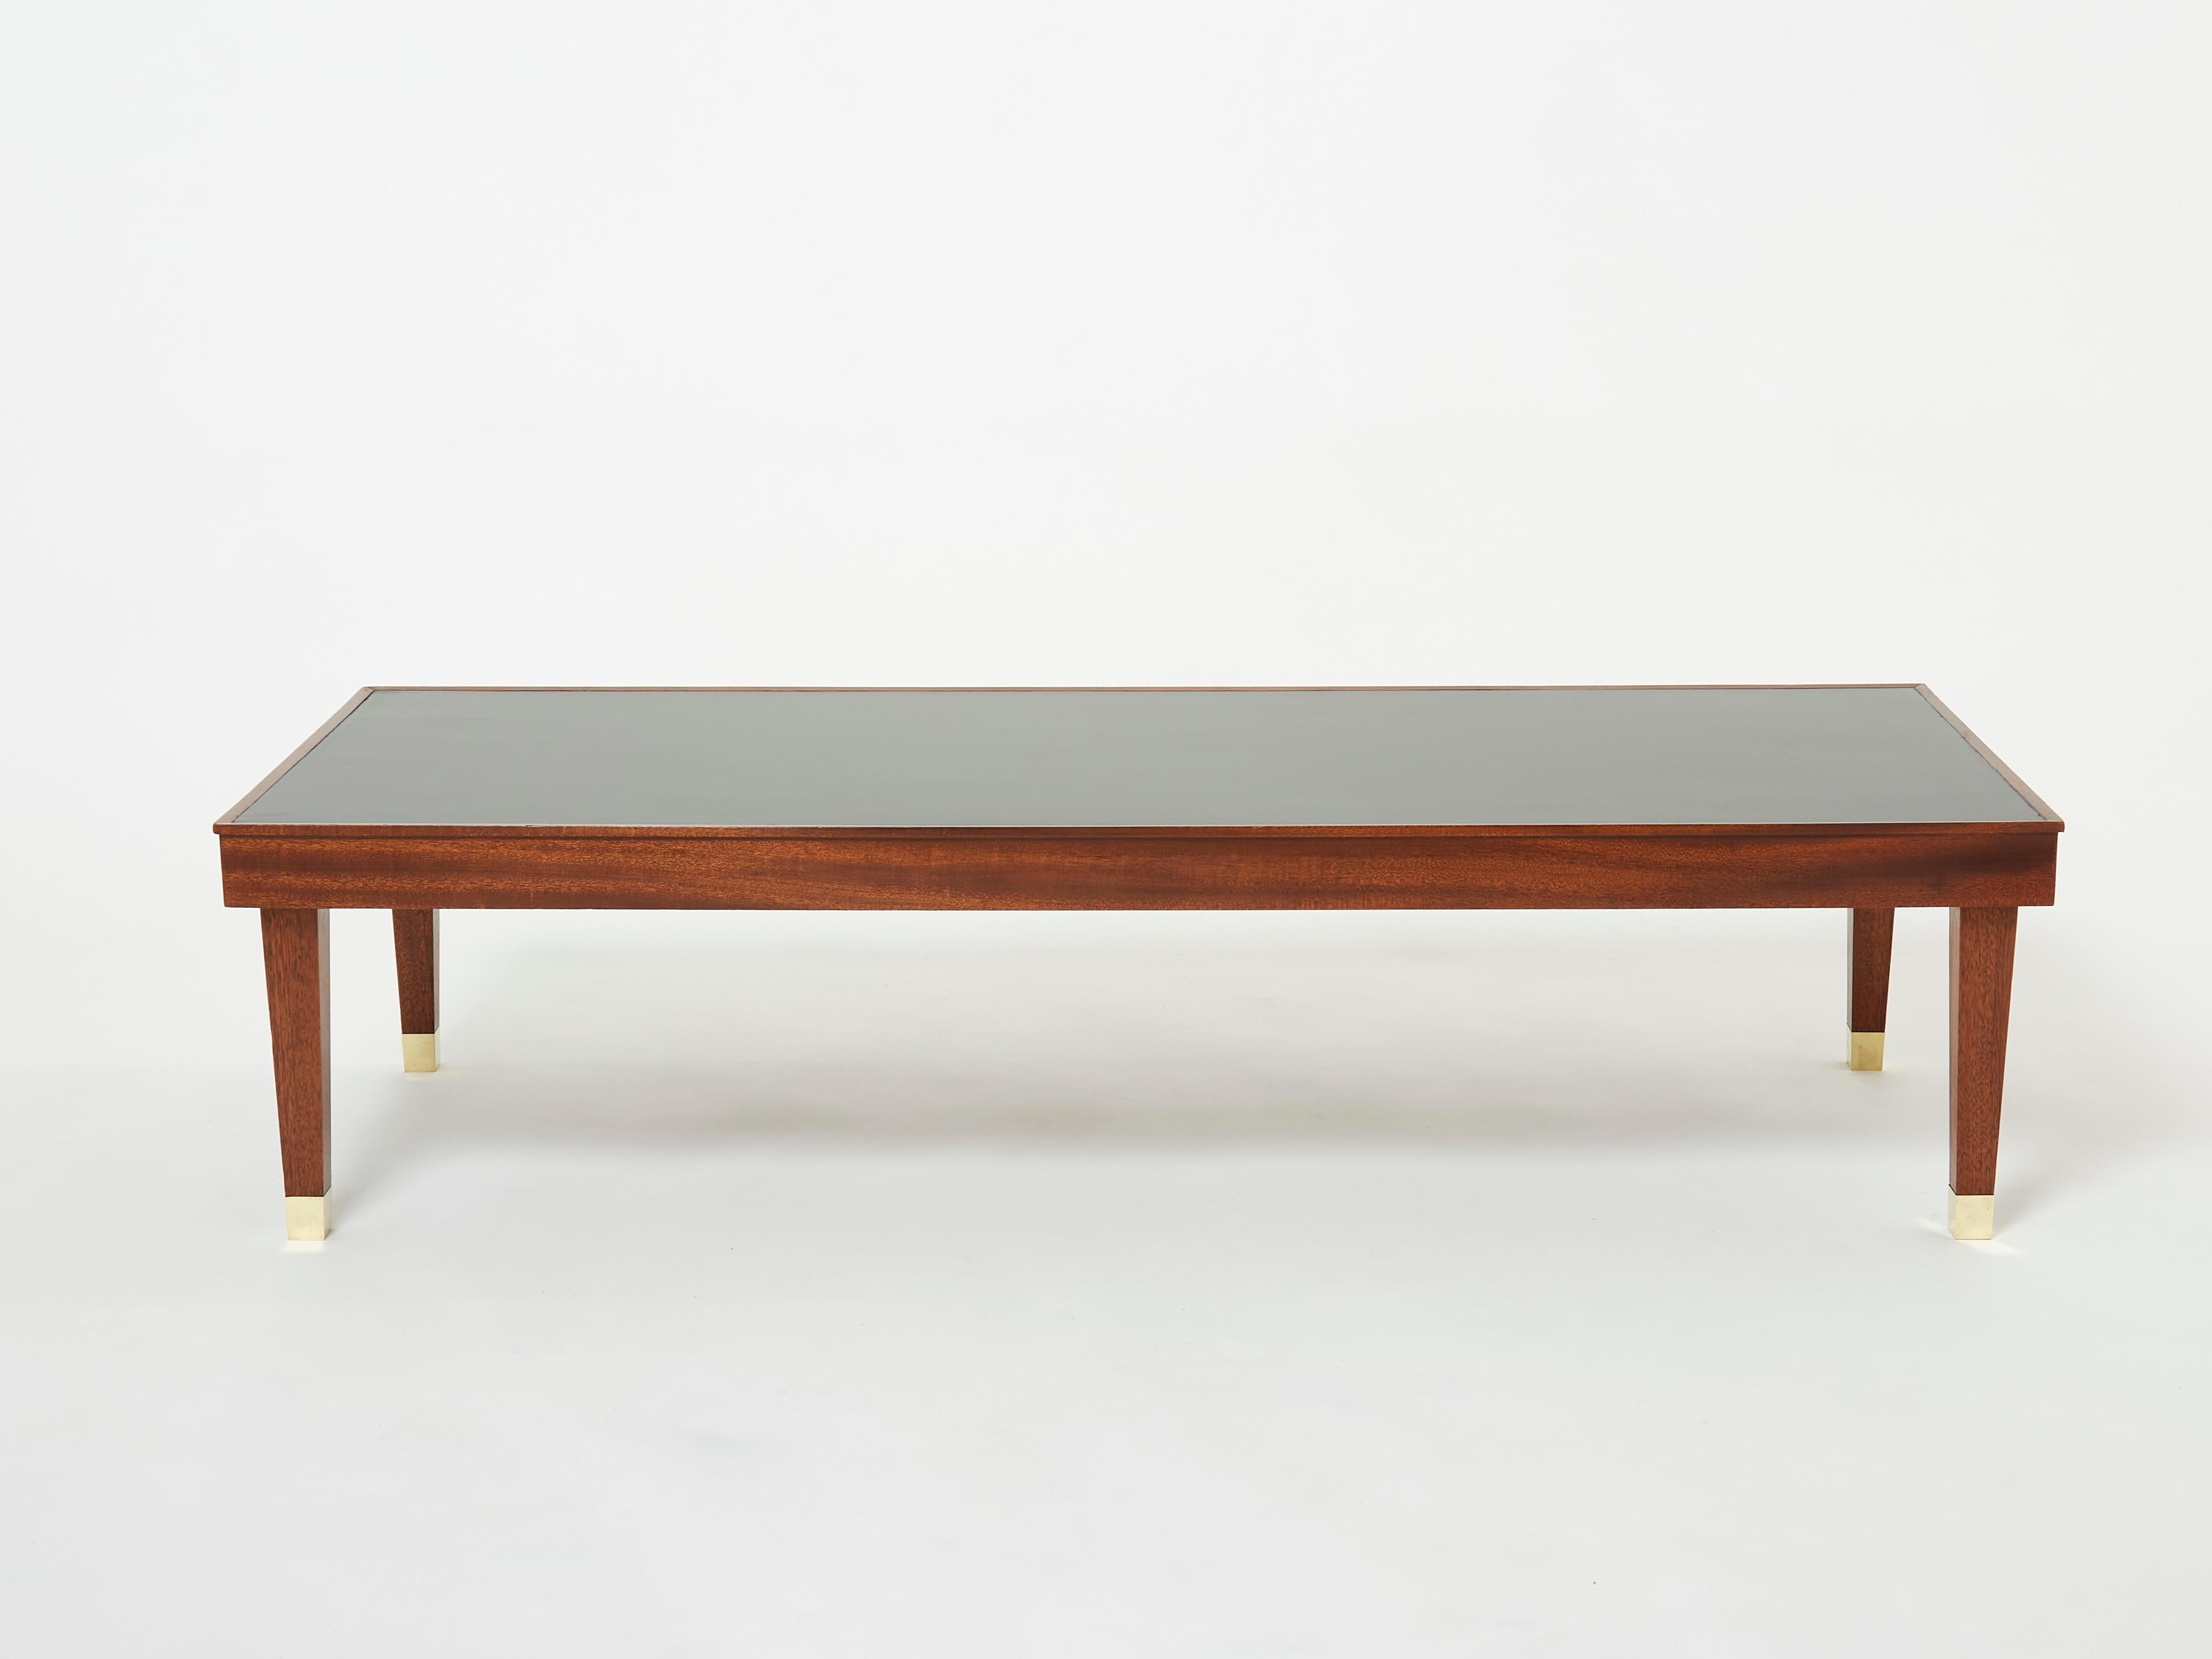 Jacques Adnet Mahogany Brass Modernist Coffee Table, 1950s For Sale 3